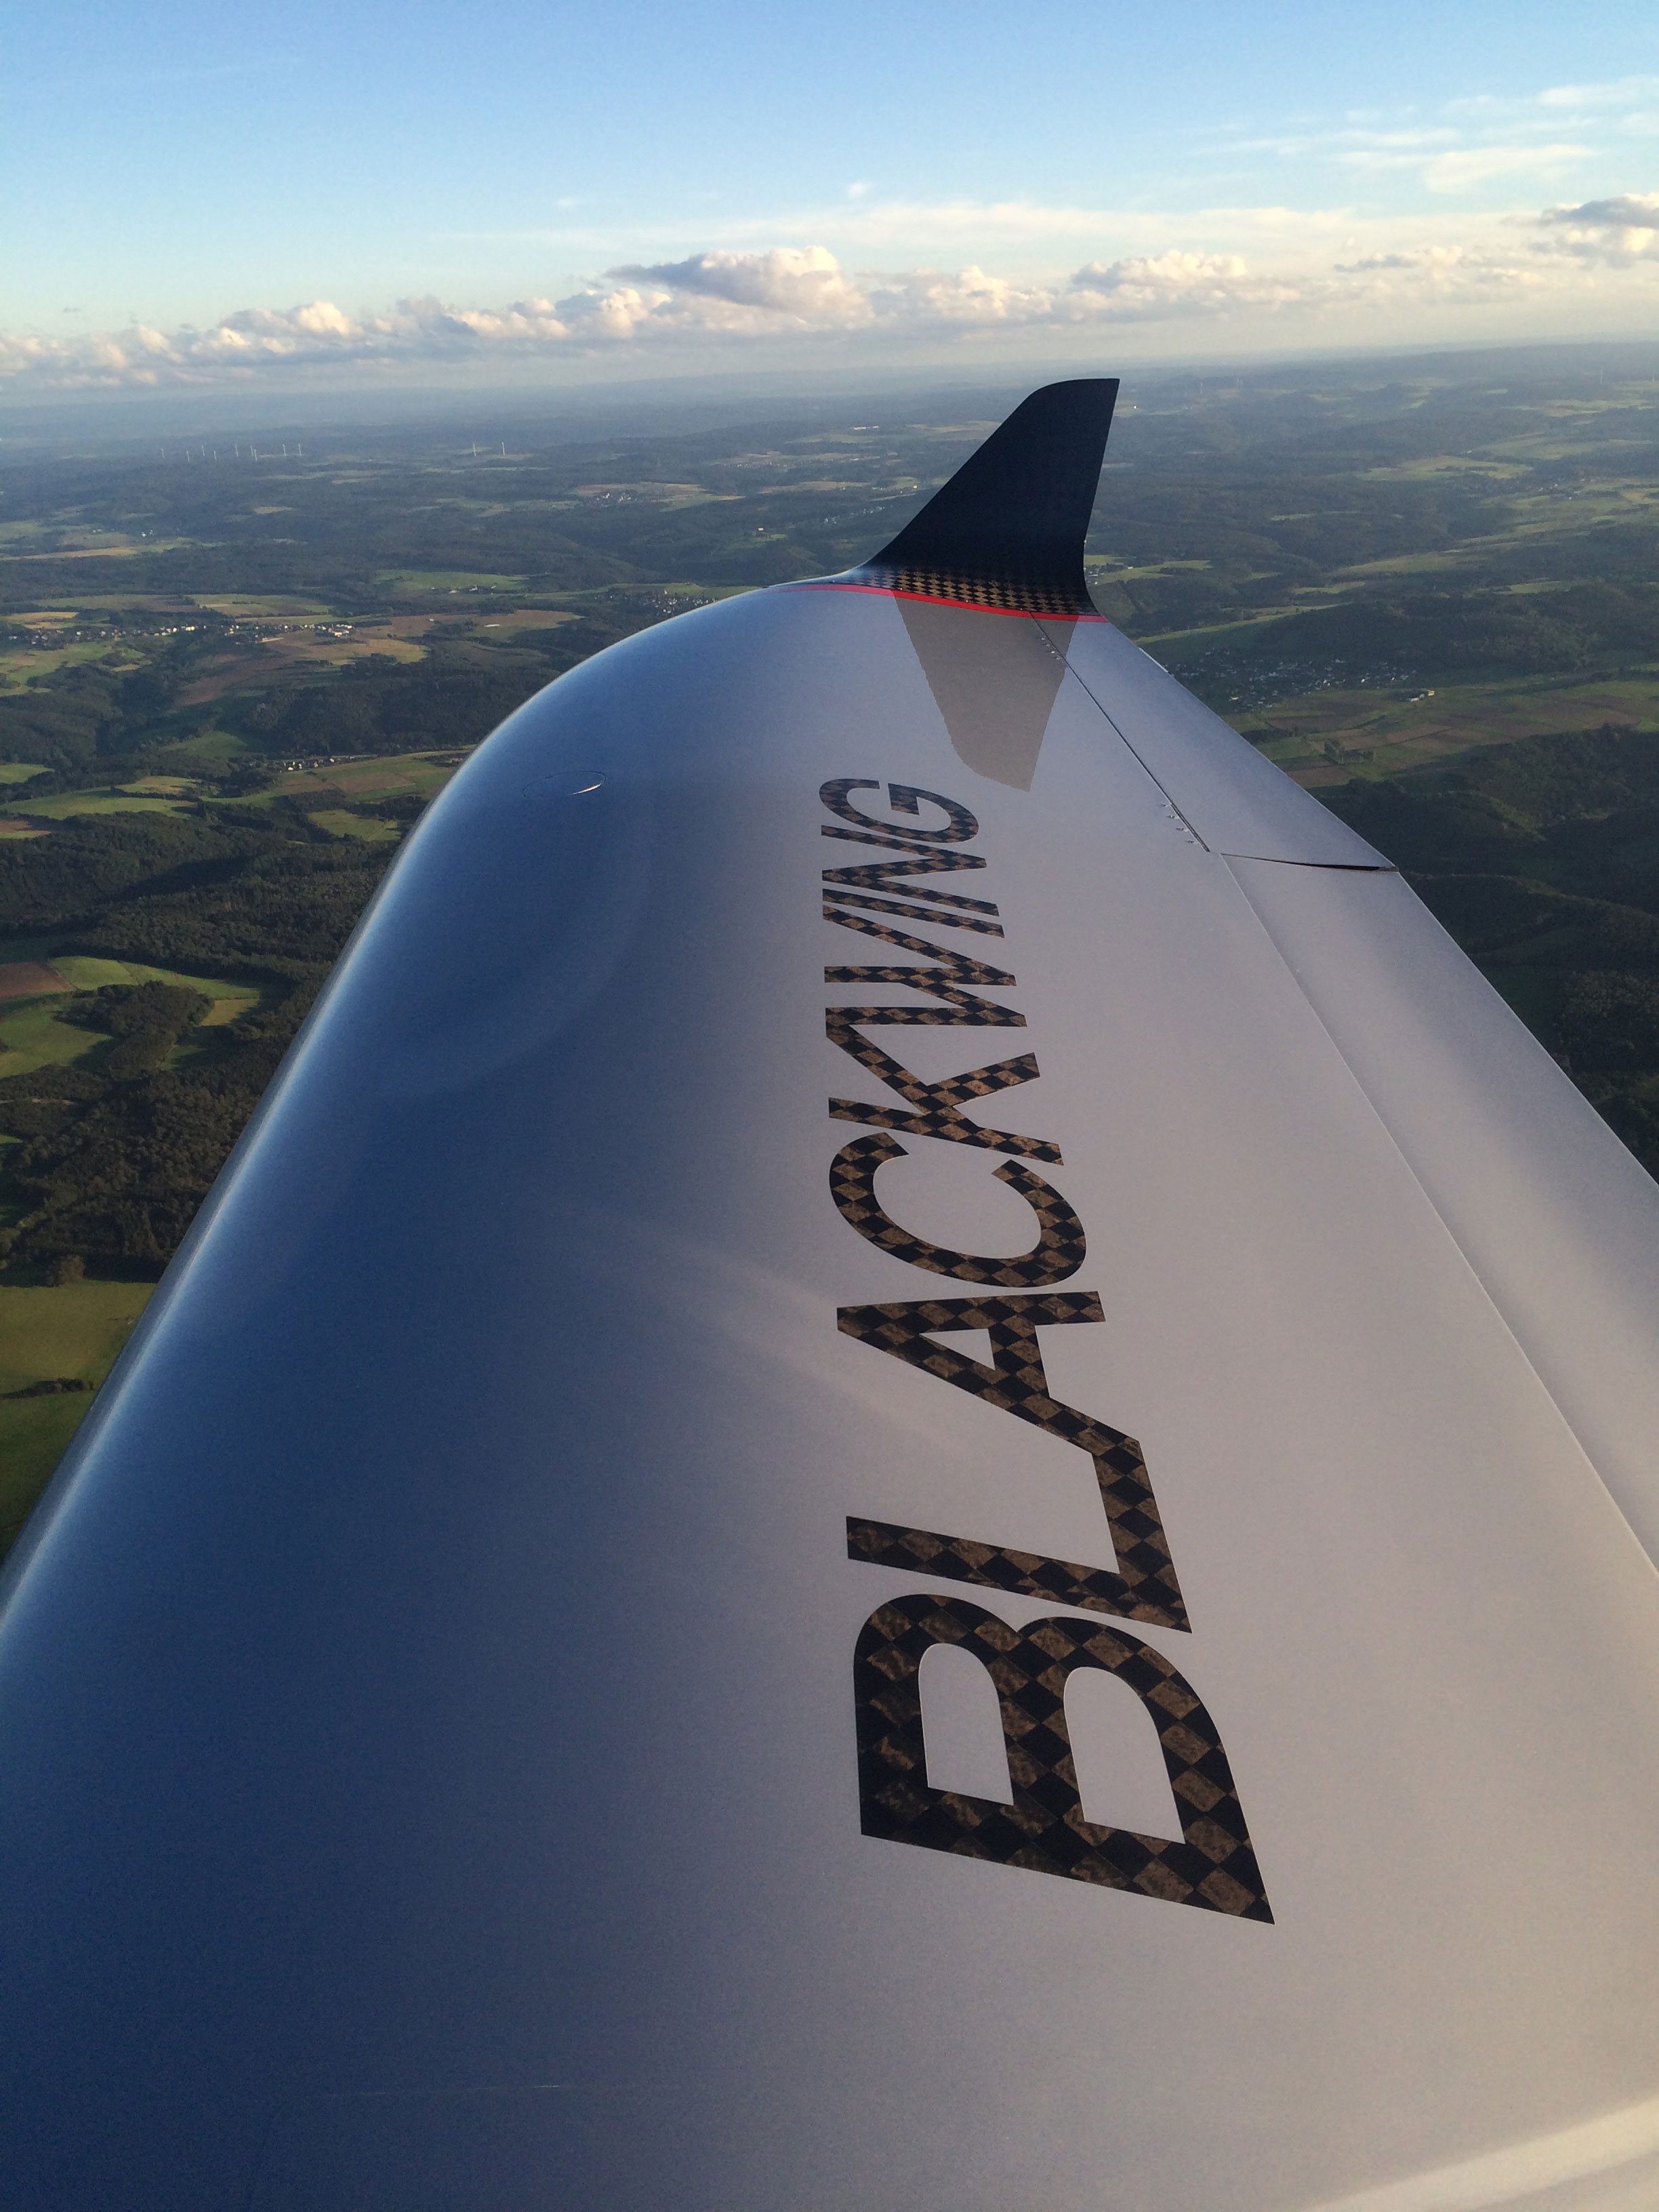 BlackWing’s BW600 series lightweight aircraft has carbon fiber fabric wings and fuselage.